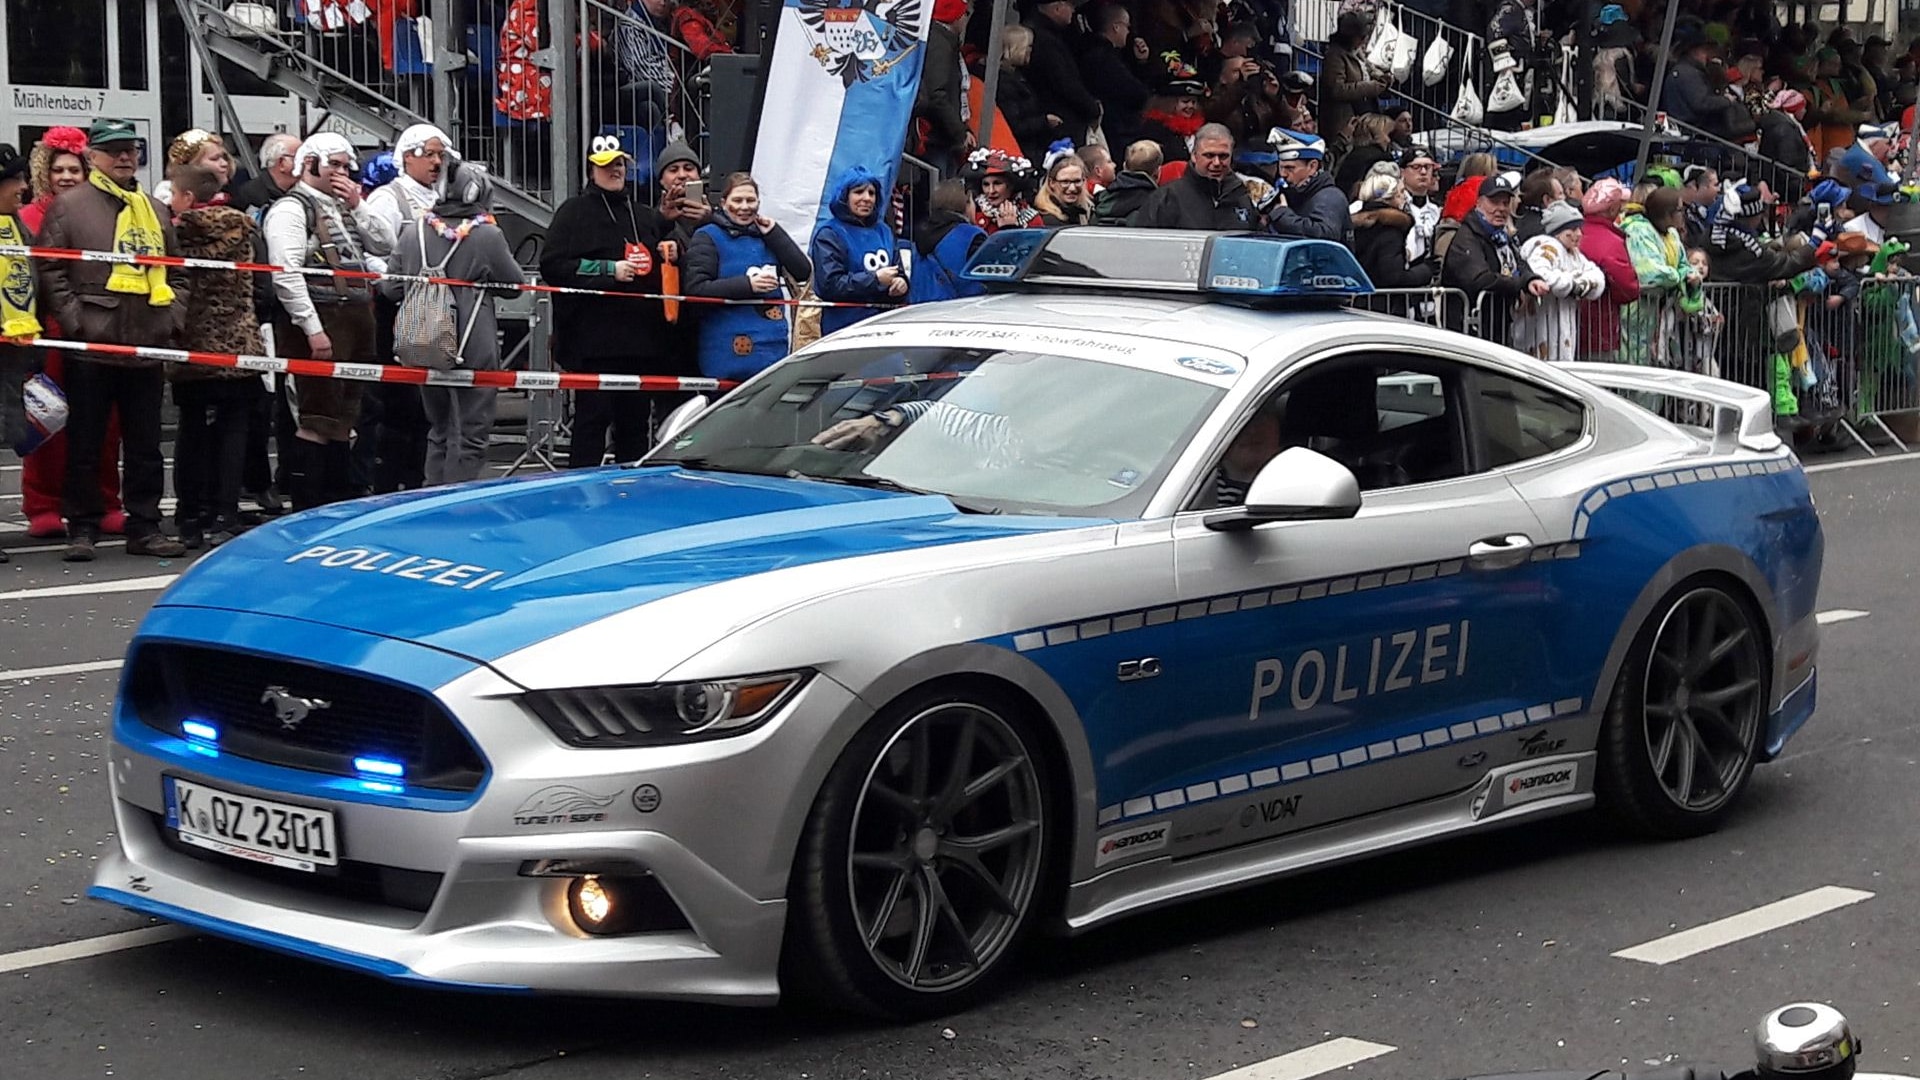 Tune it! Safe! 2017 Ford Mustang GT police car at 2017 Cologne Carnival parade